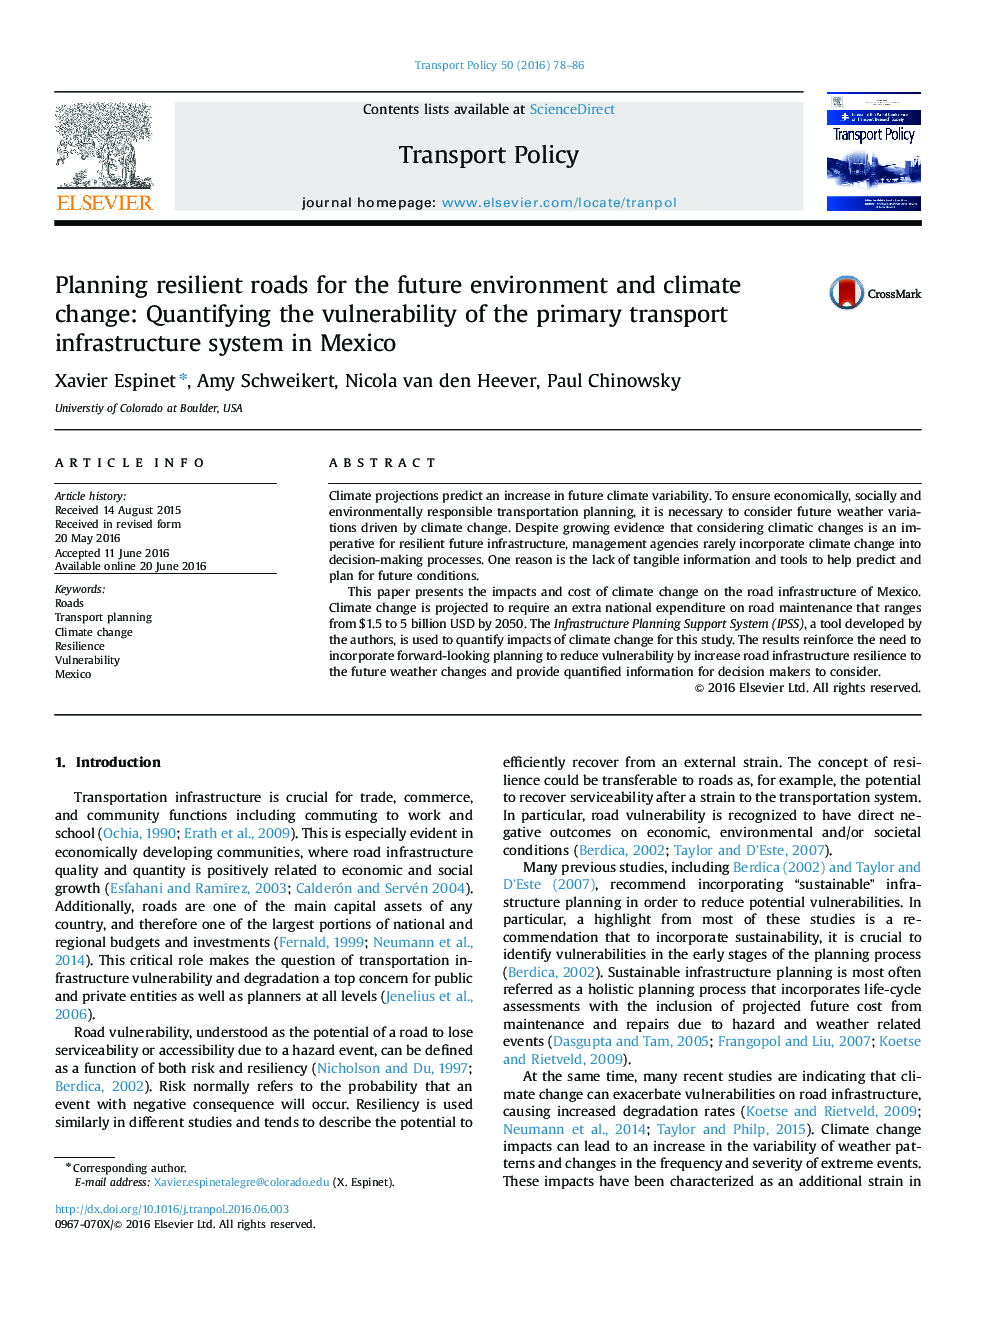 Planning resilient roads for the future environment and climate change: Quantifying the vulnerability of the primary transport infrastructure system in Mexico